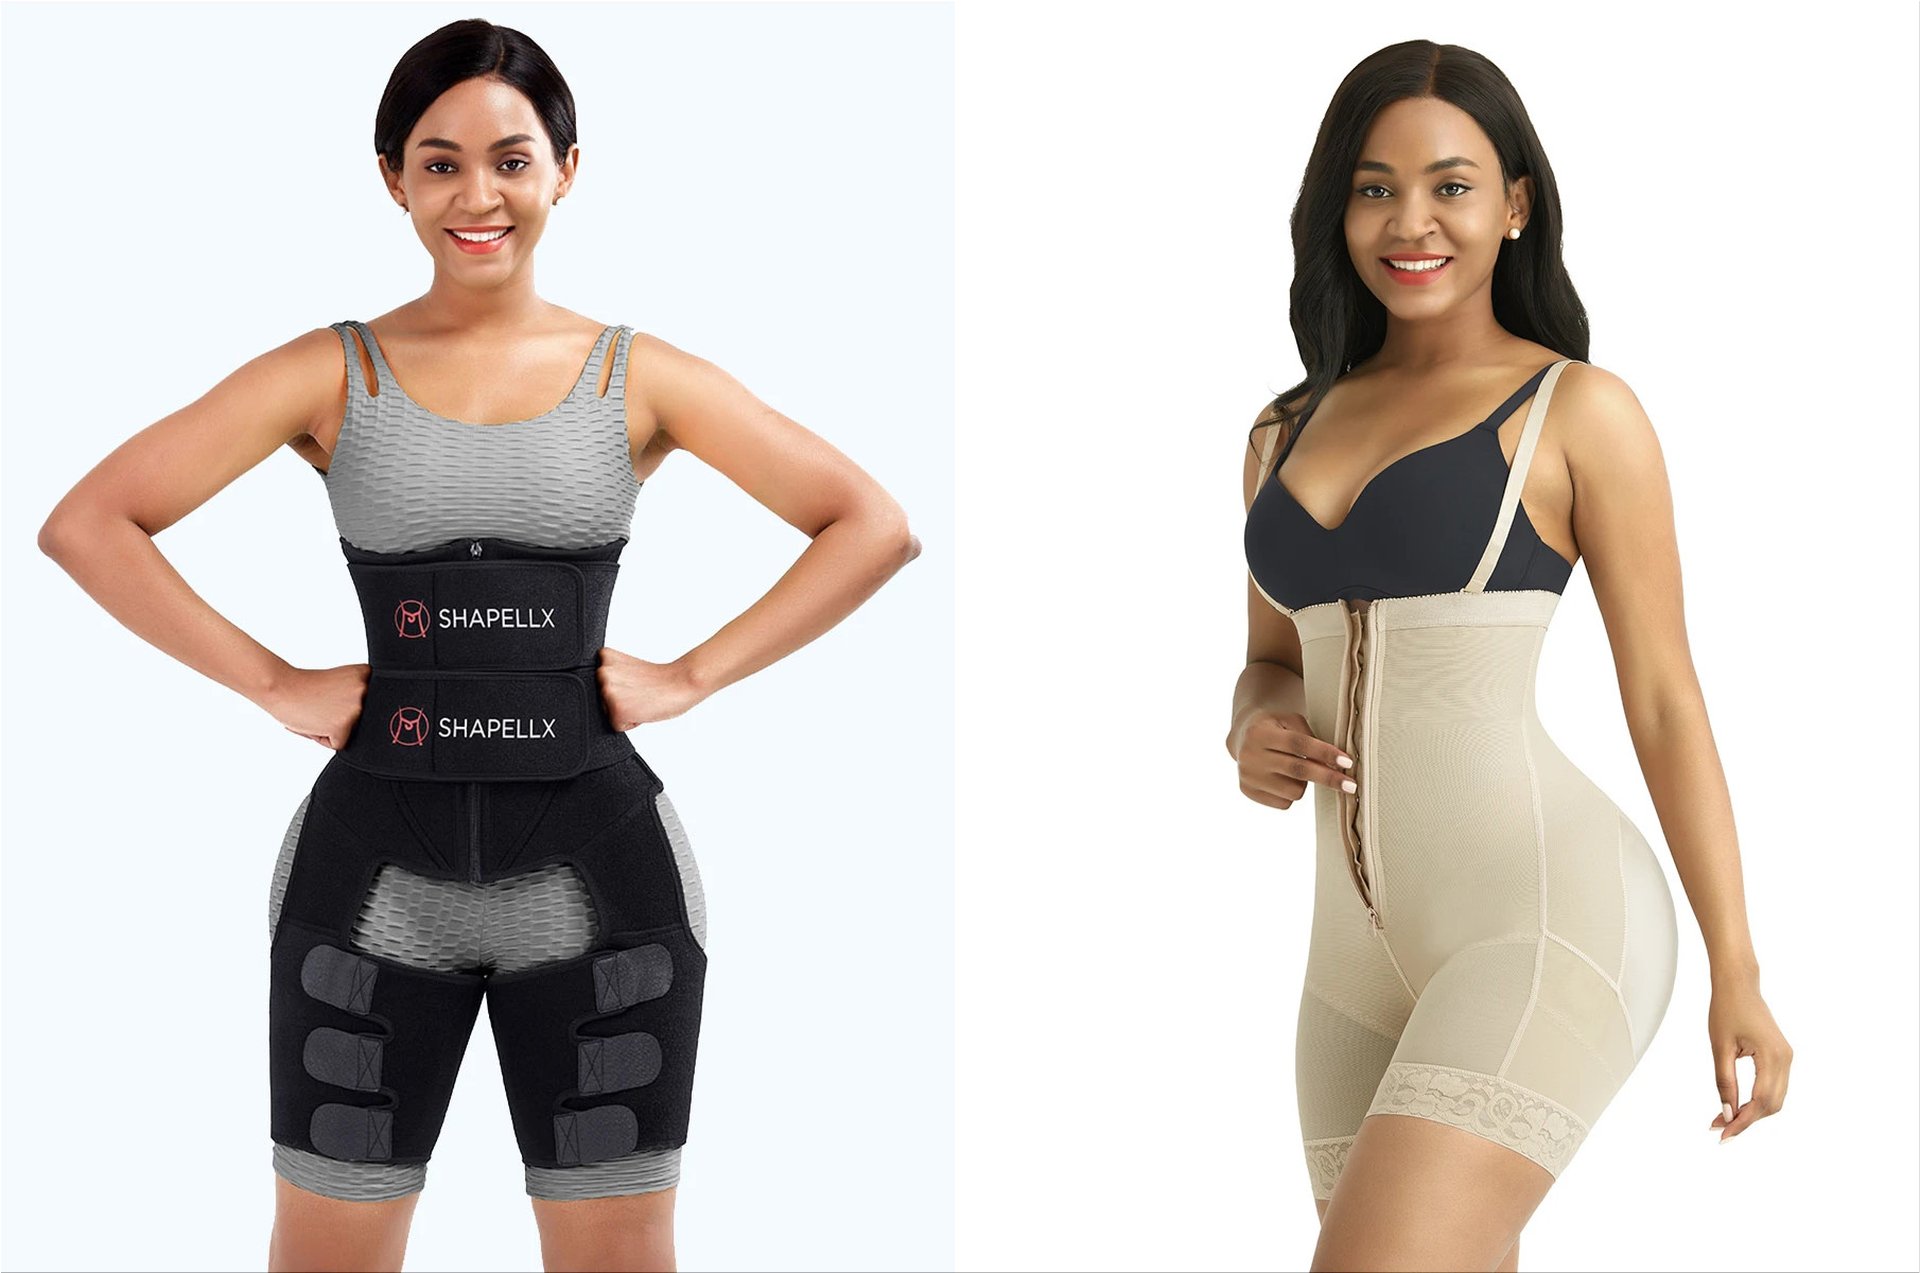 Shapellx Is Known for Iconic, Comfortable and Effective Shapewear